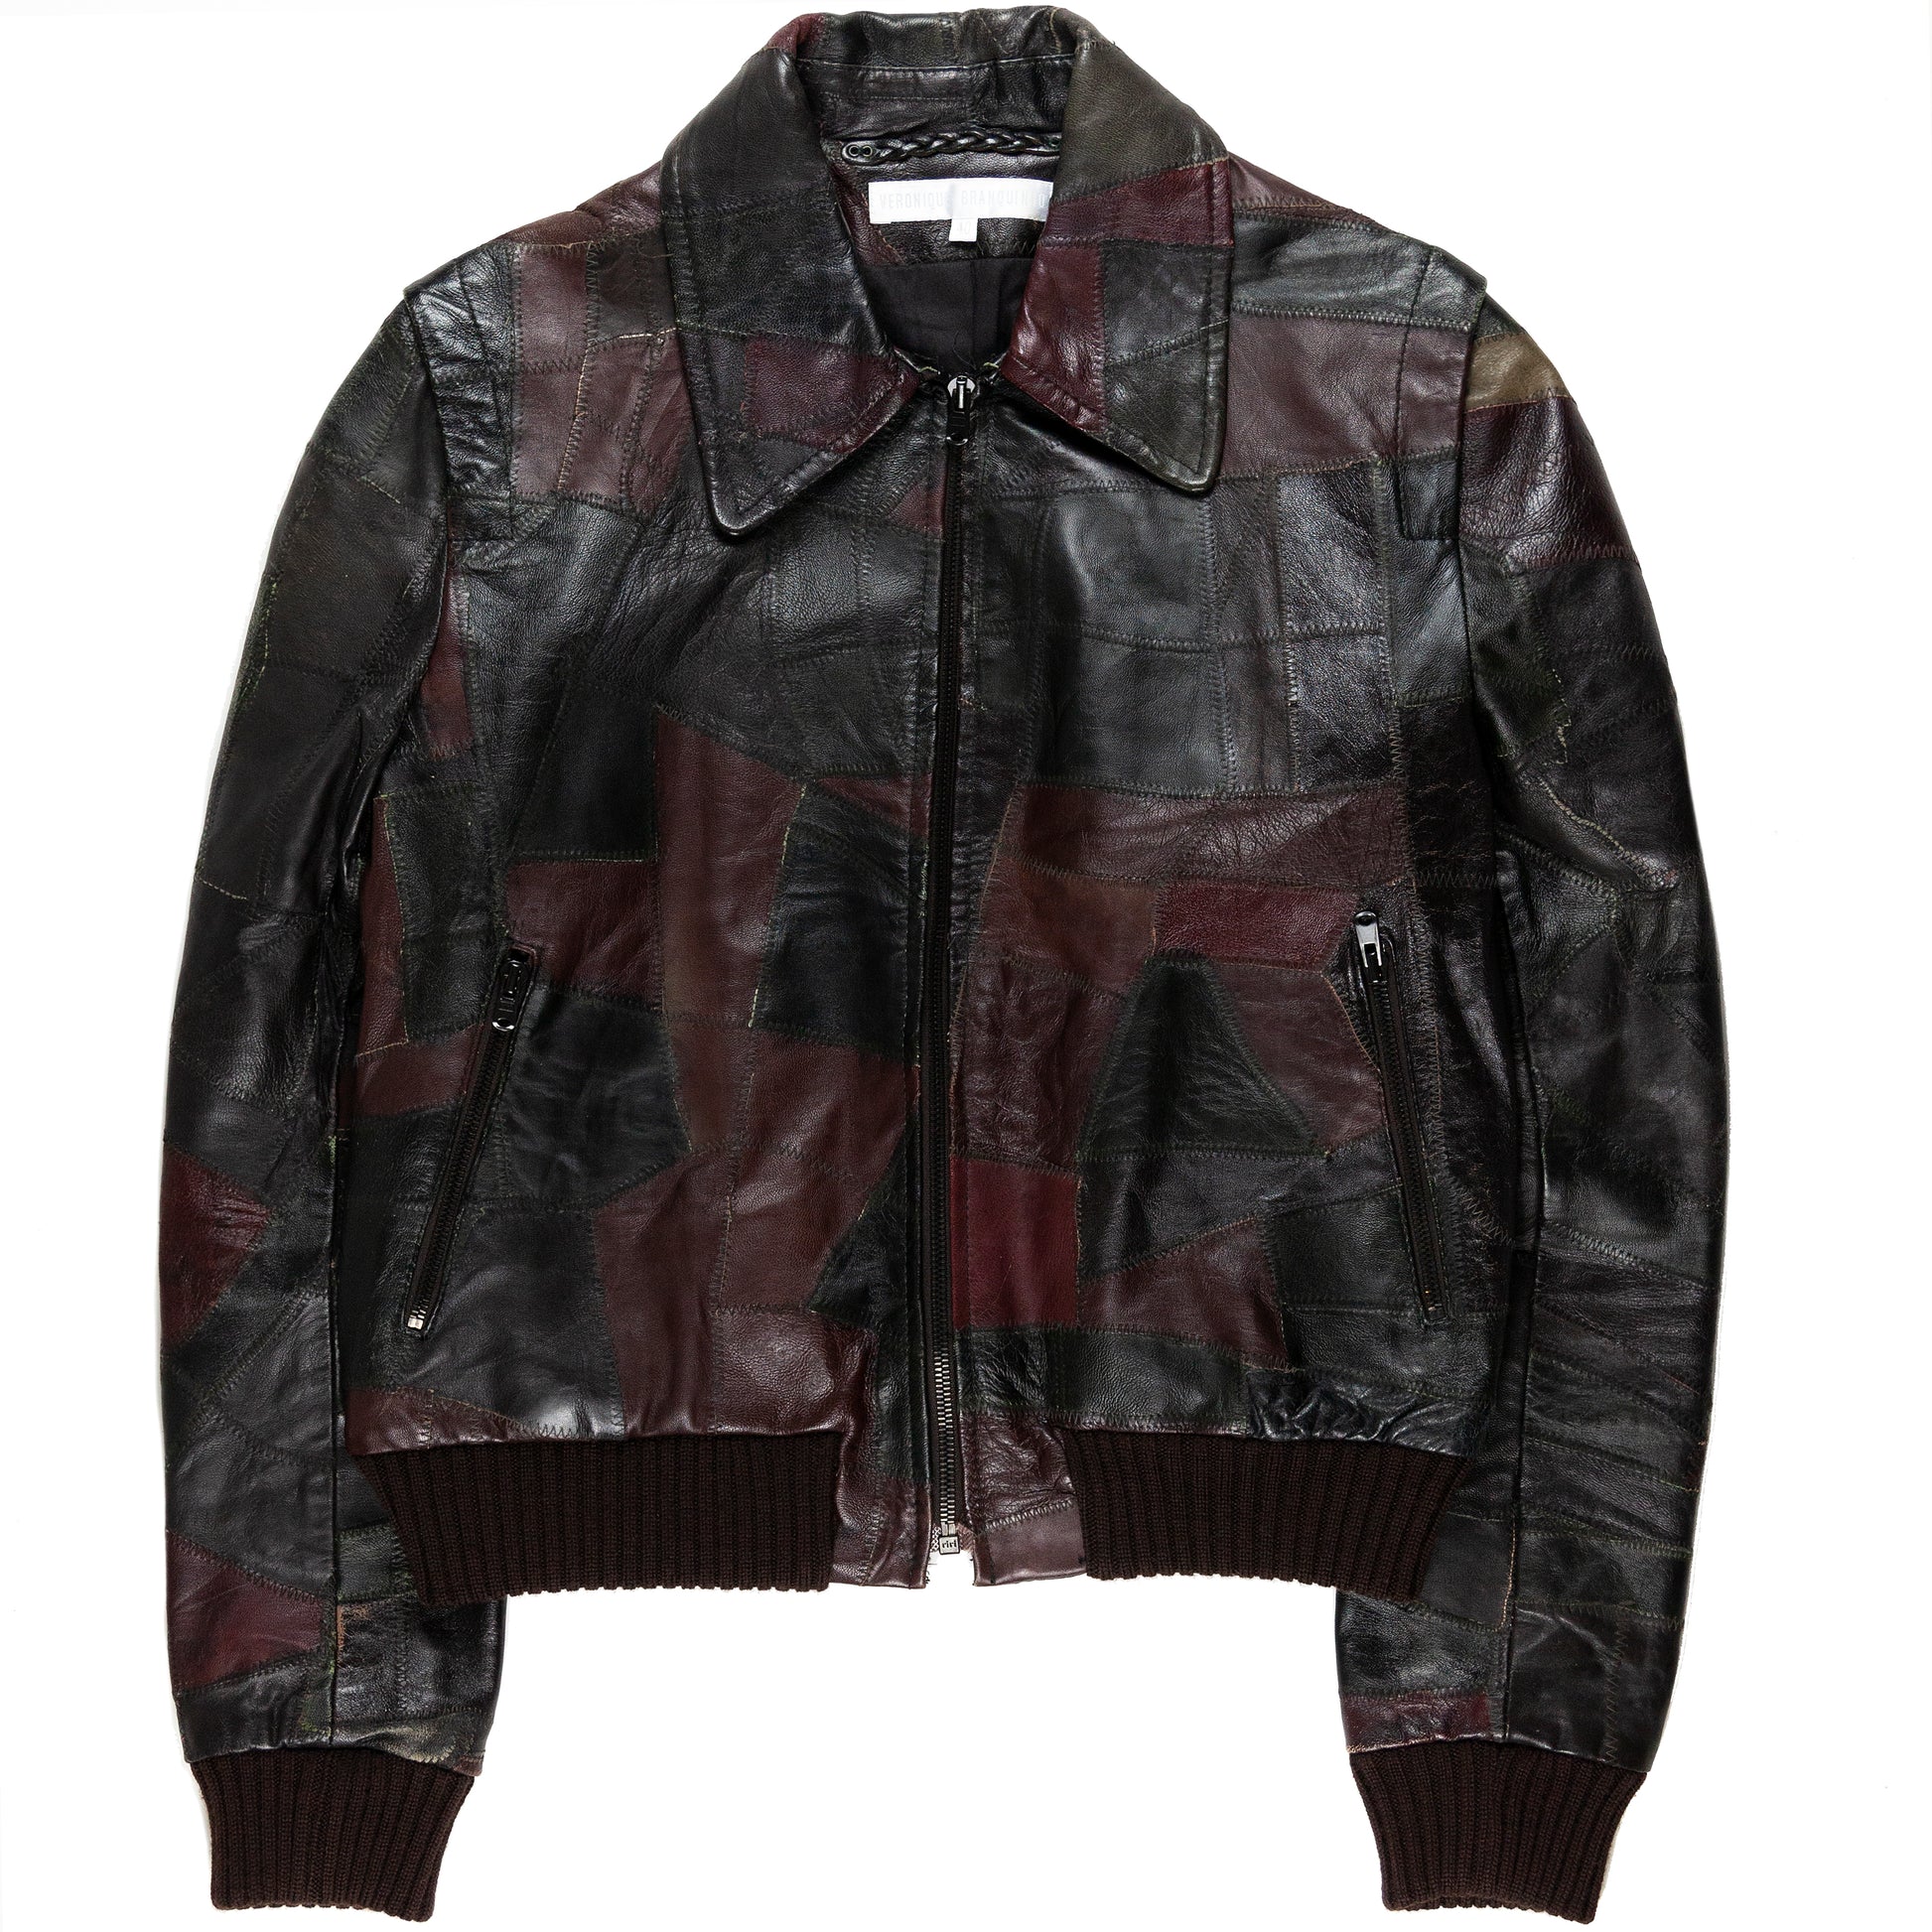 VERONIQUE BRANQUINHO RECONSTRUCTED LEATHER JACKET - AW01 - SILVER LEAGUE